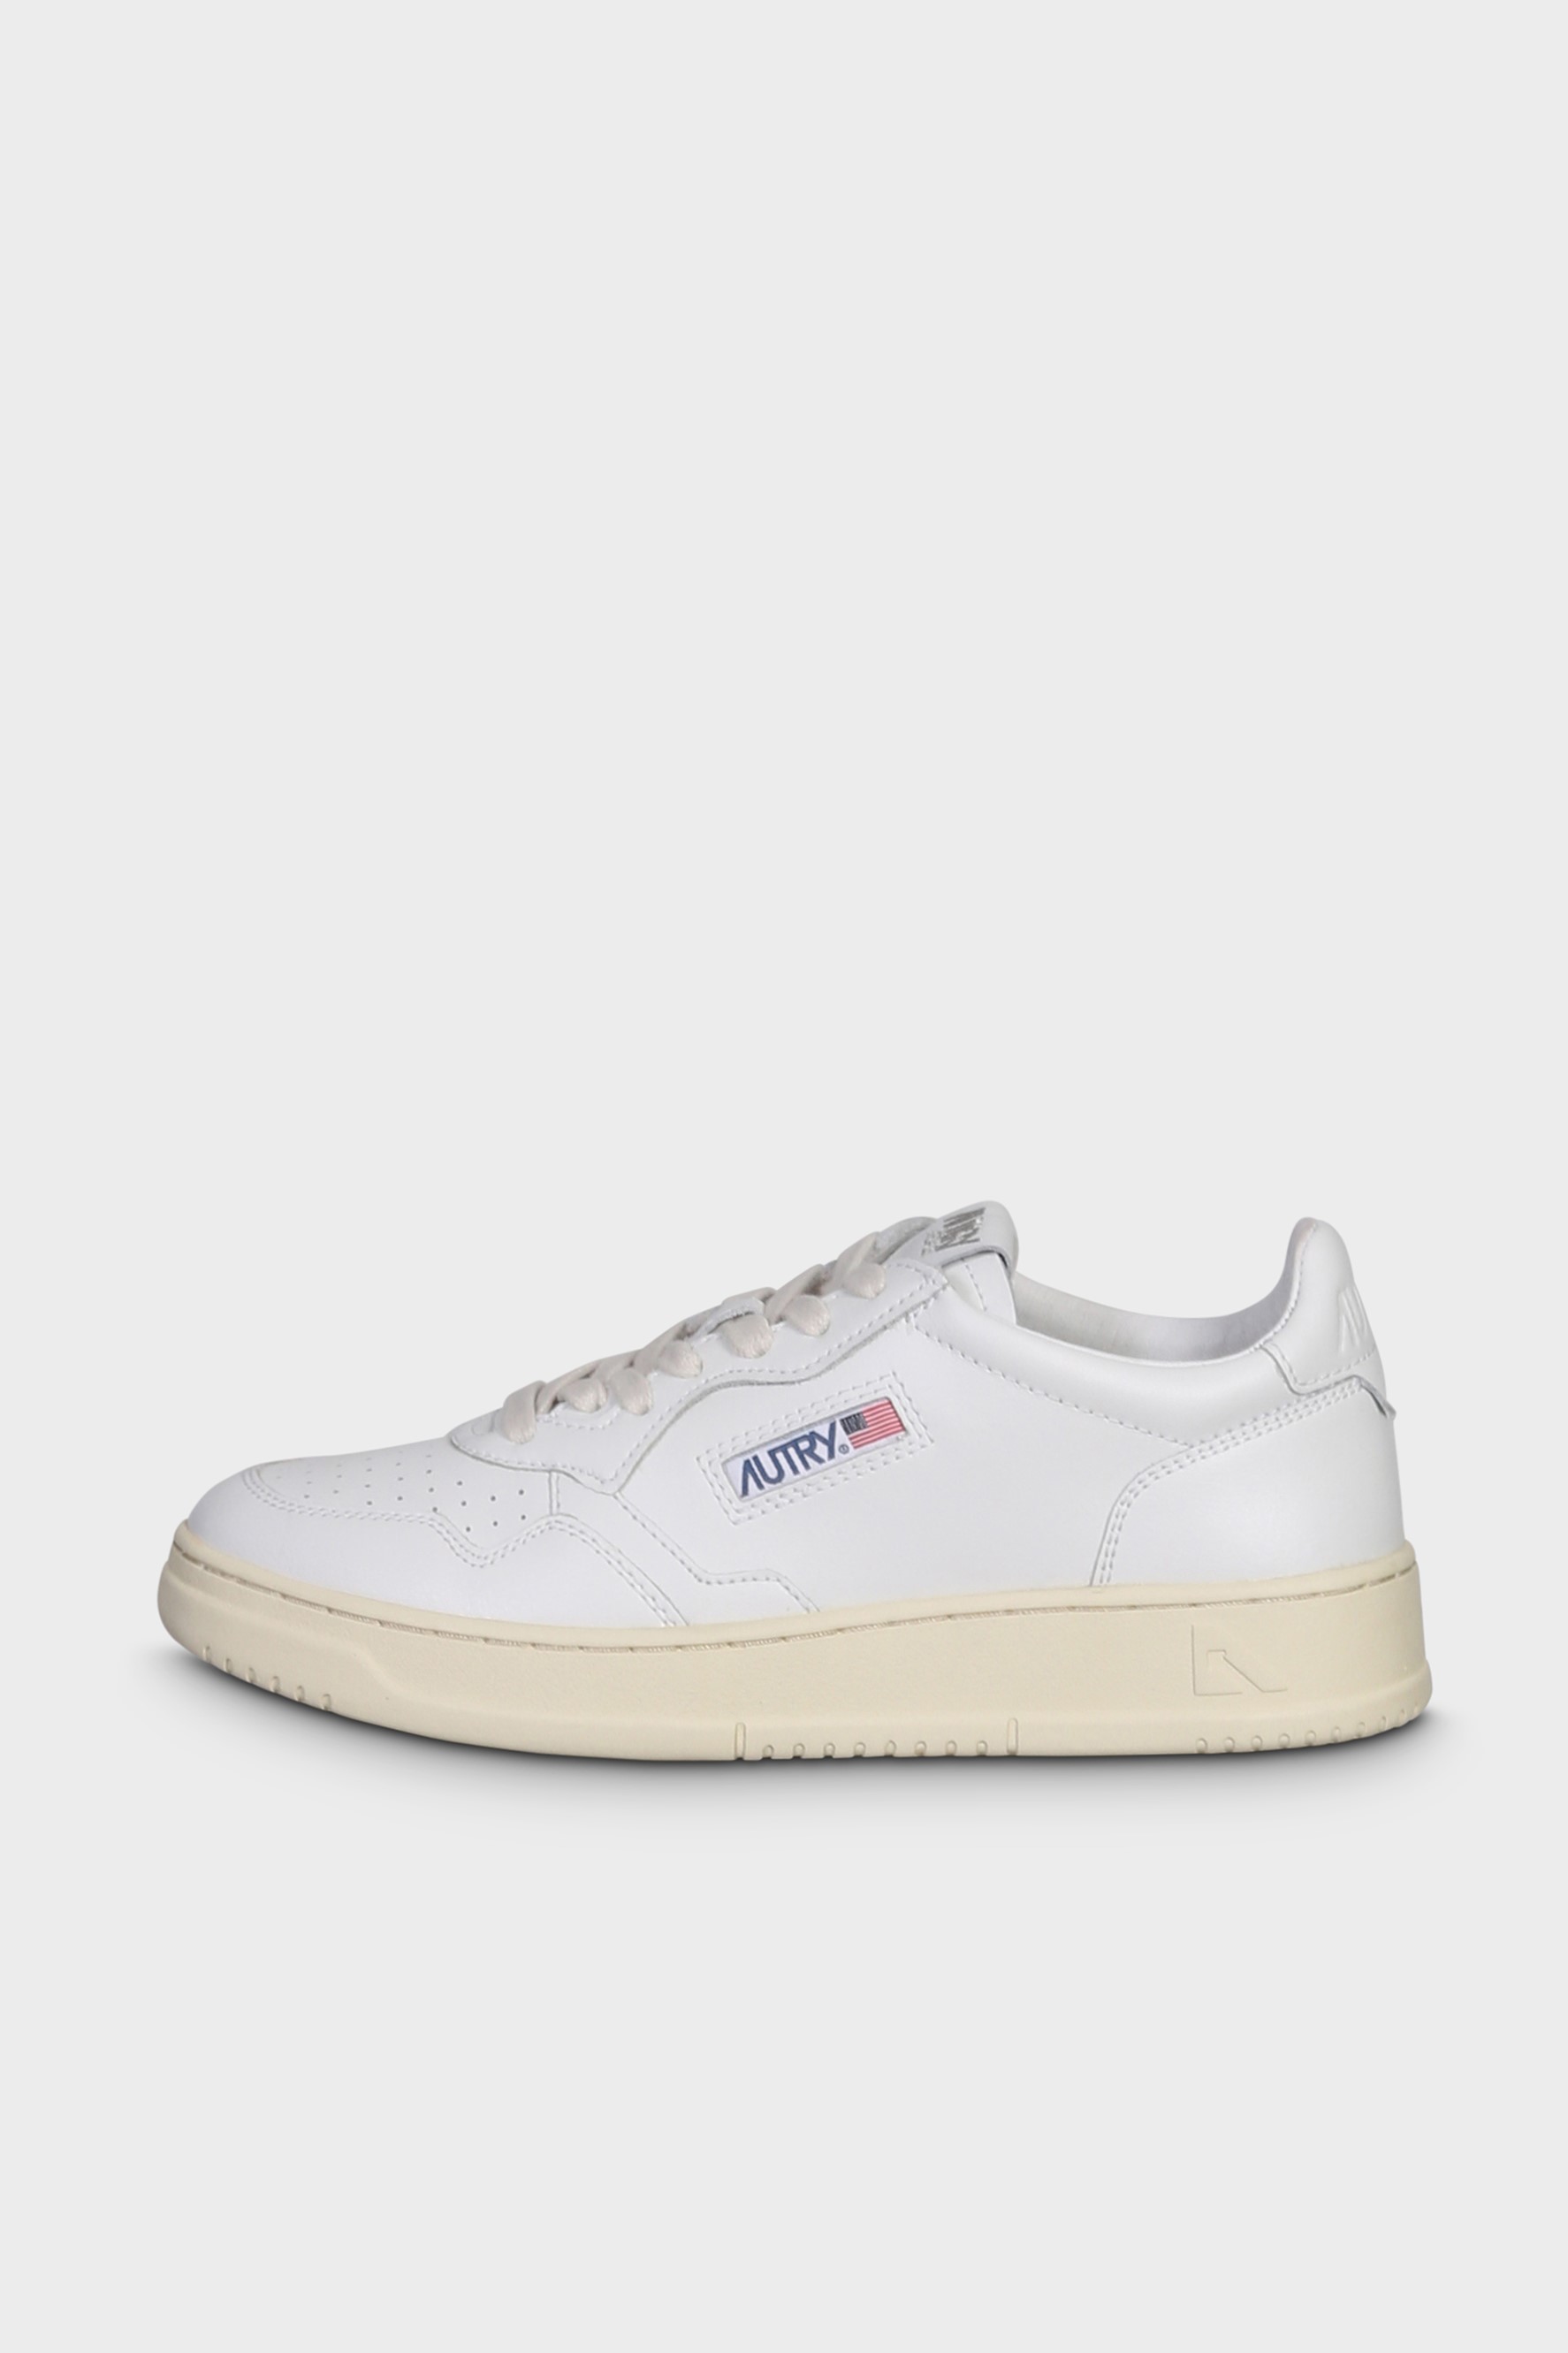 AUTRY ACTION SHOES Medalist Low Sneaker in White/White